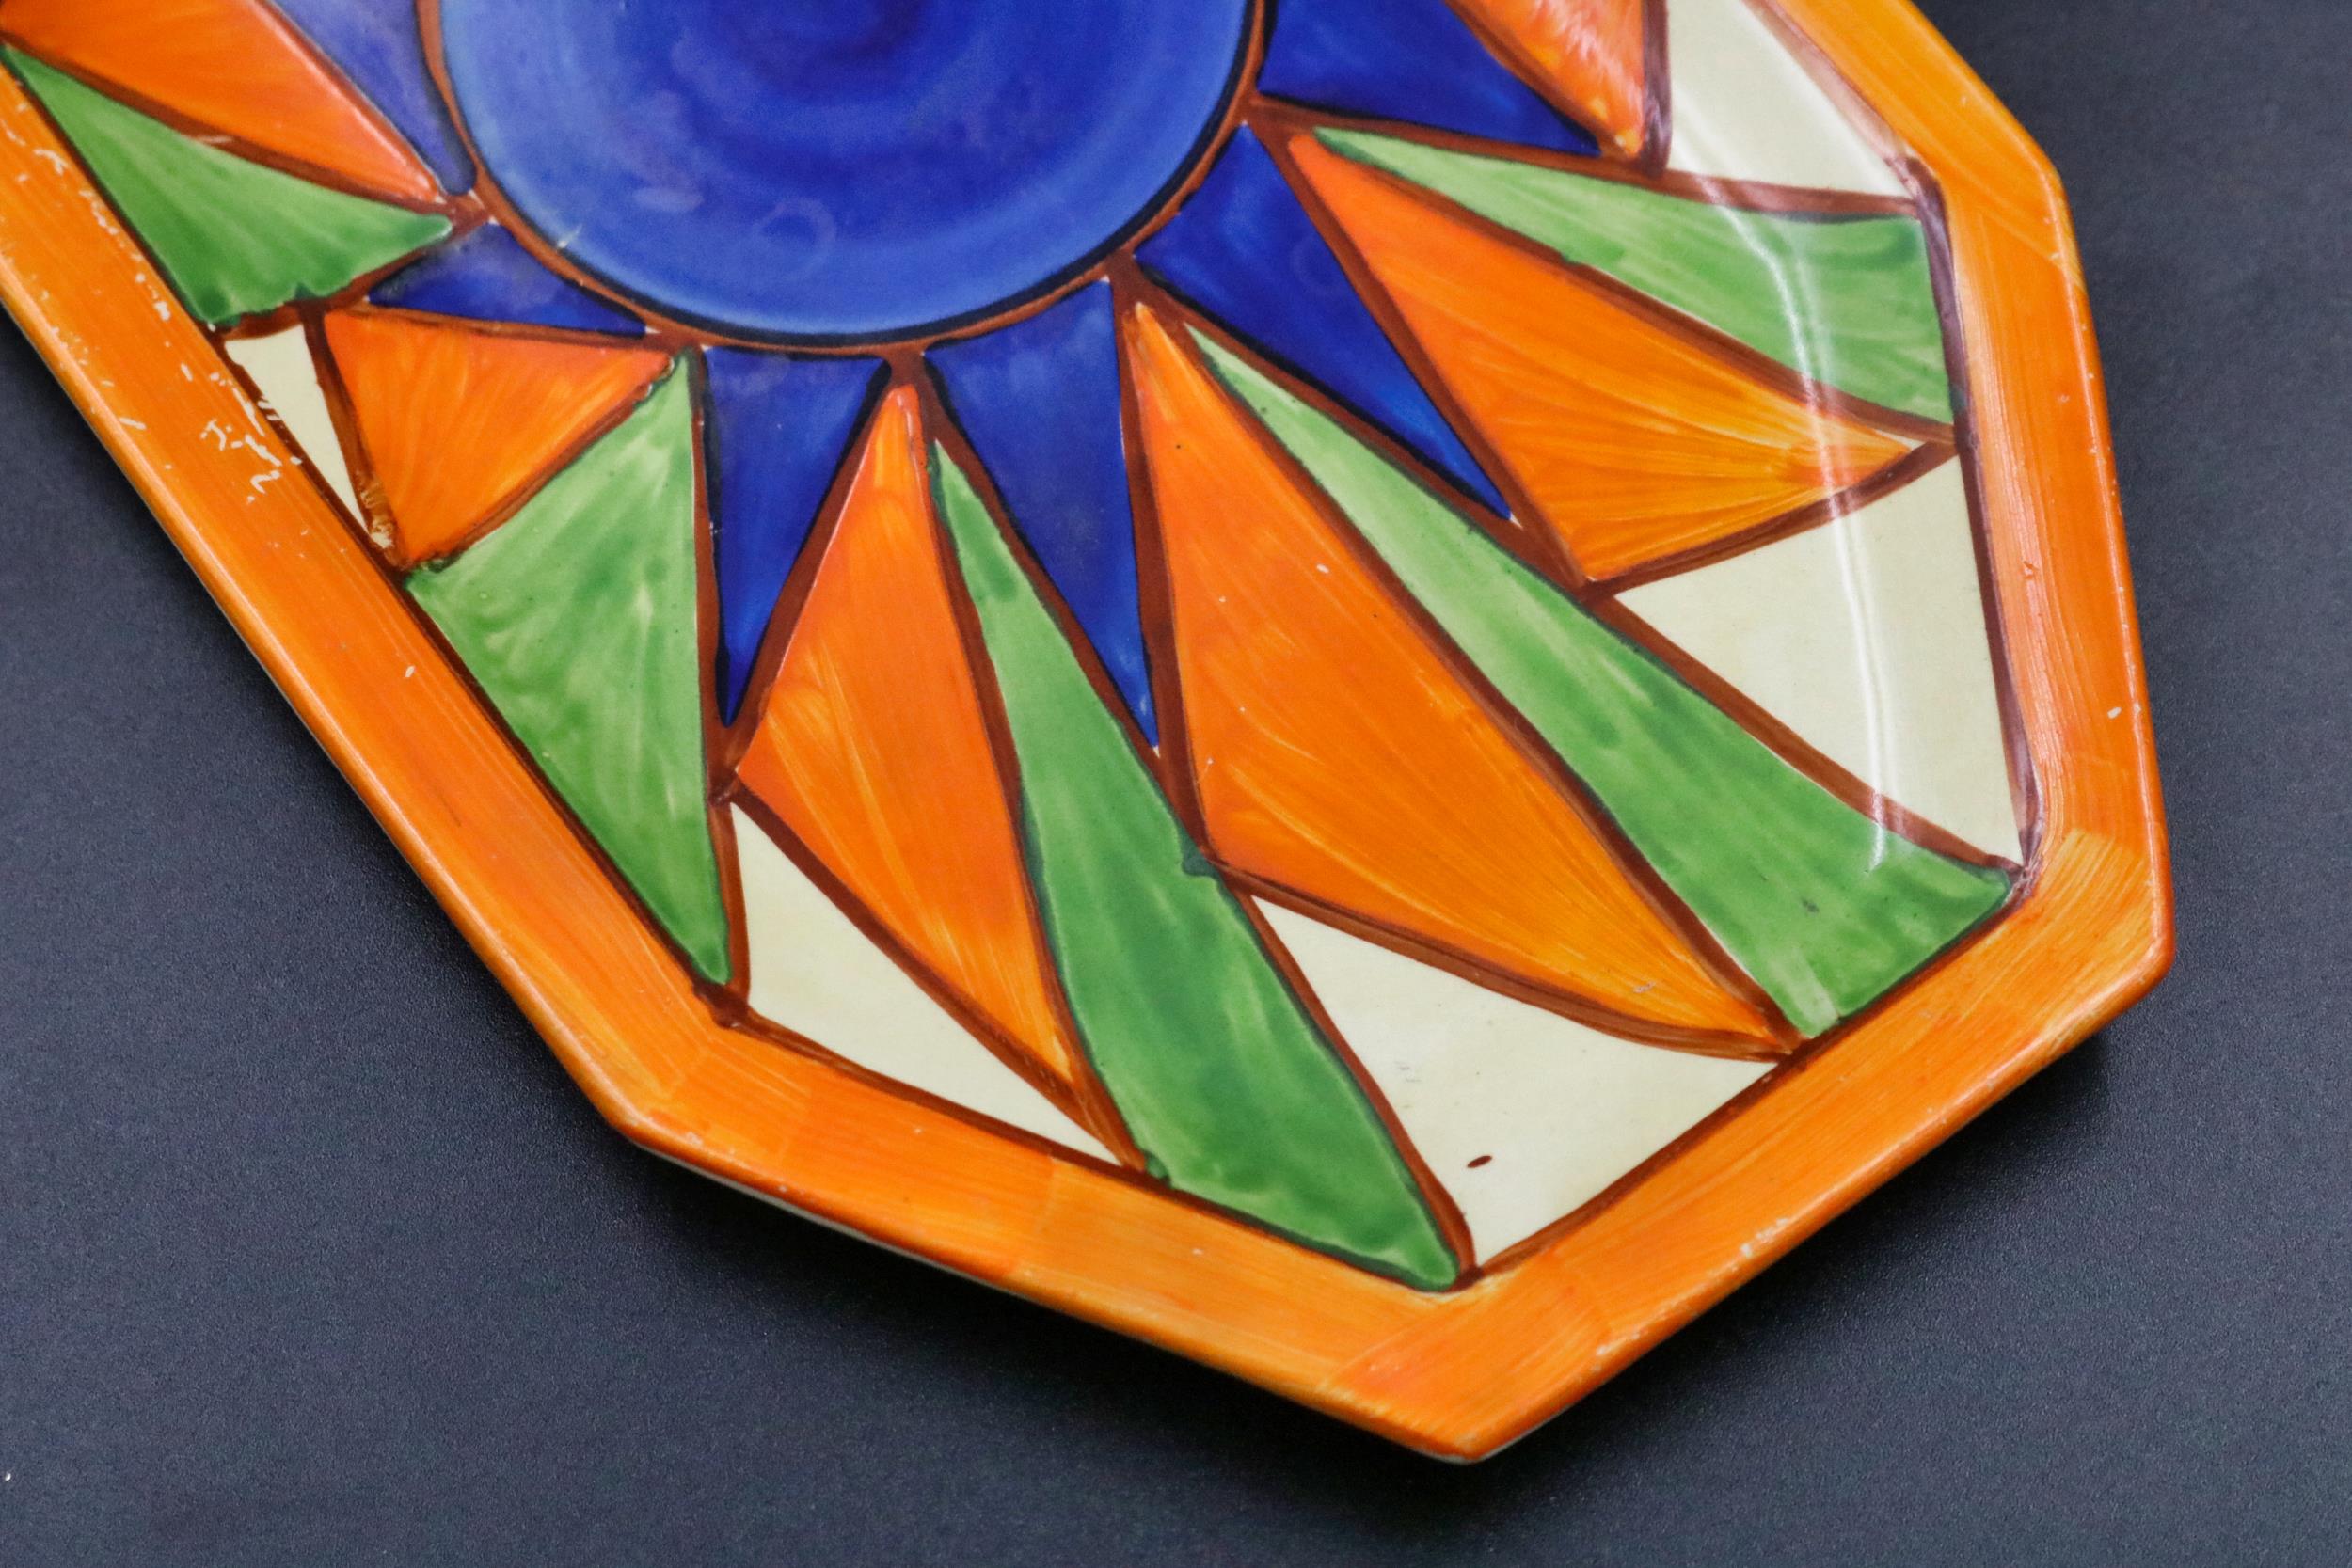 Clarice Cliff, Bizarre pattern sandwich plate - Newport pottery 11.52 x 6" some paint flaking - Image 4 of 8